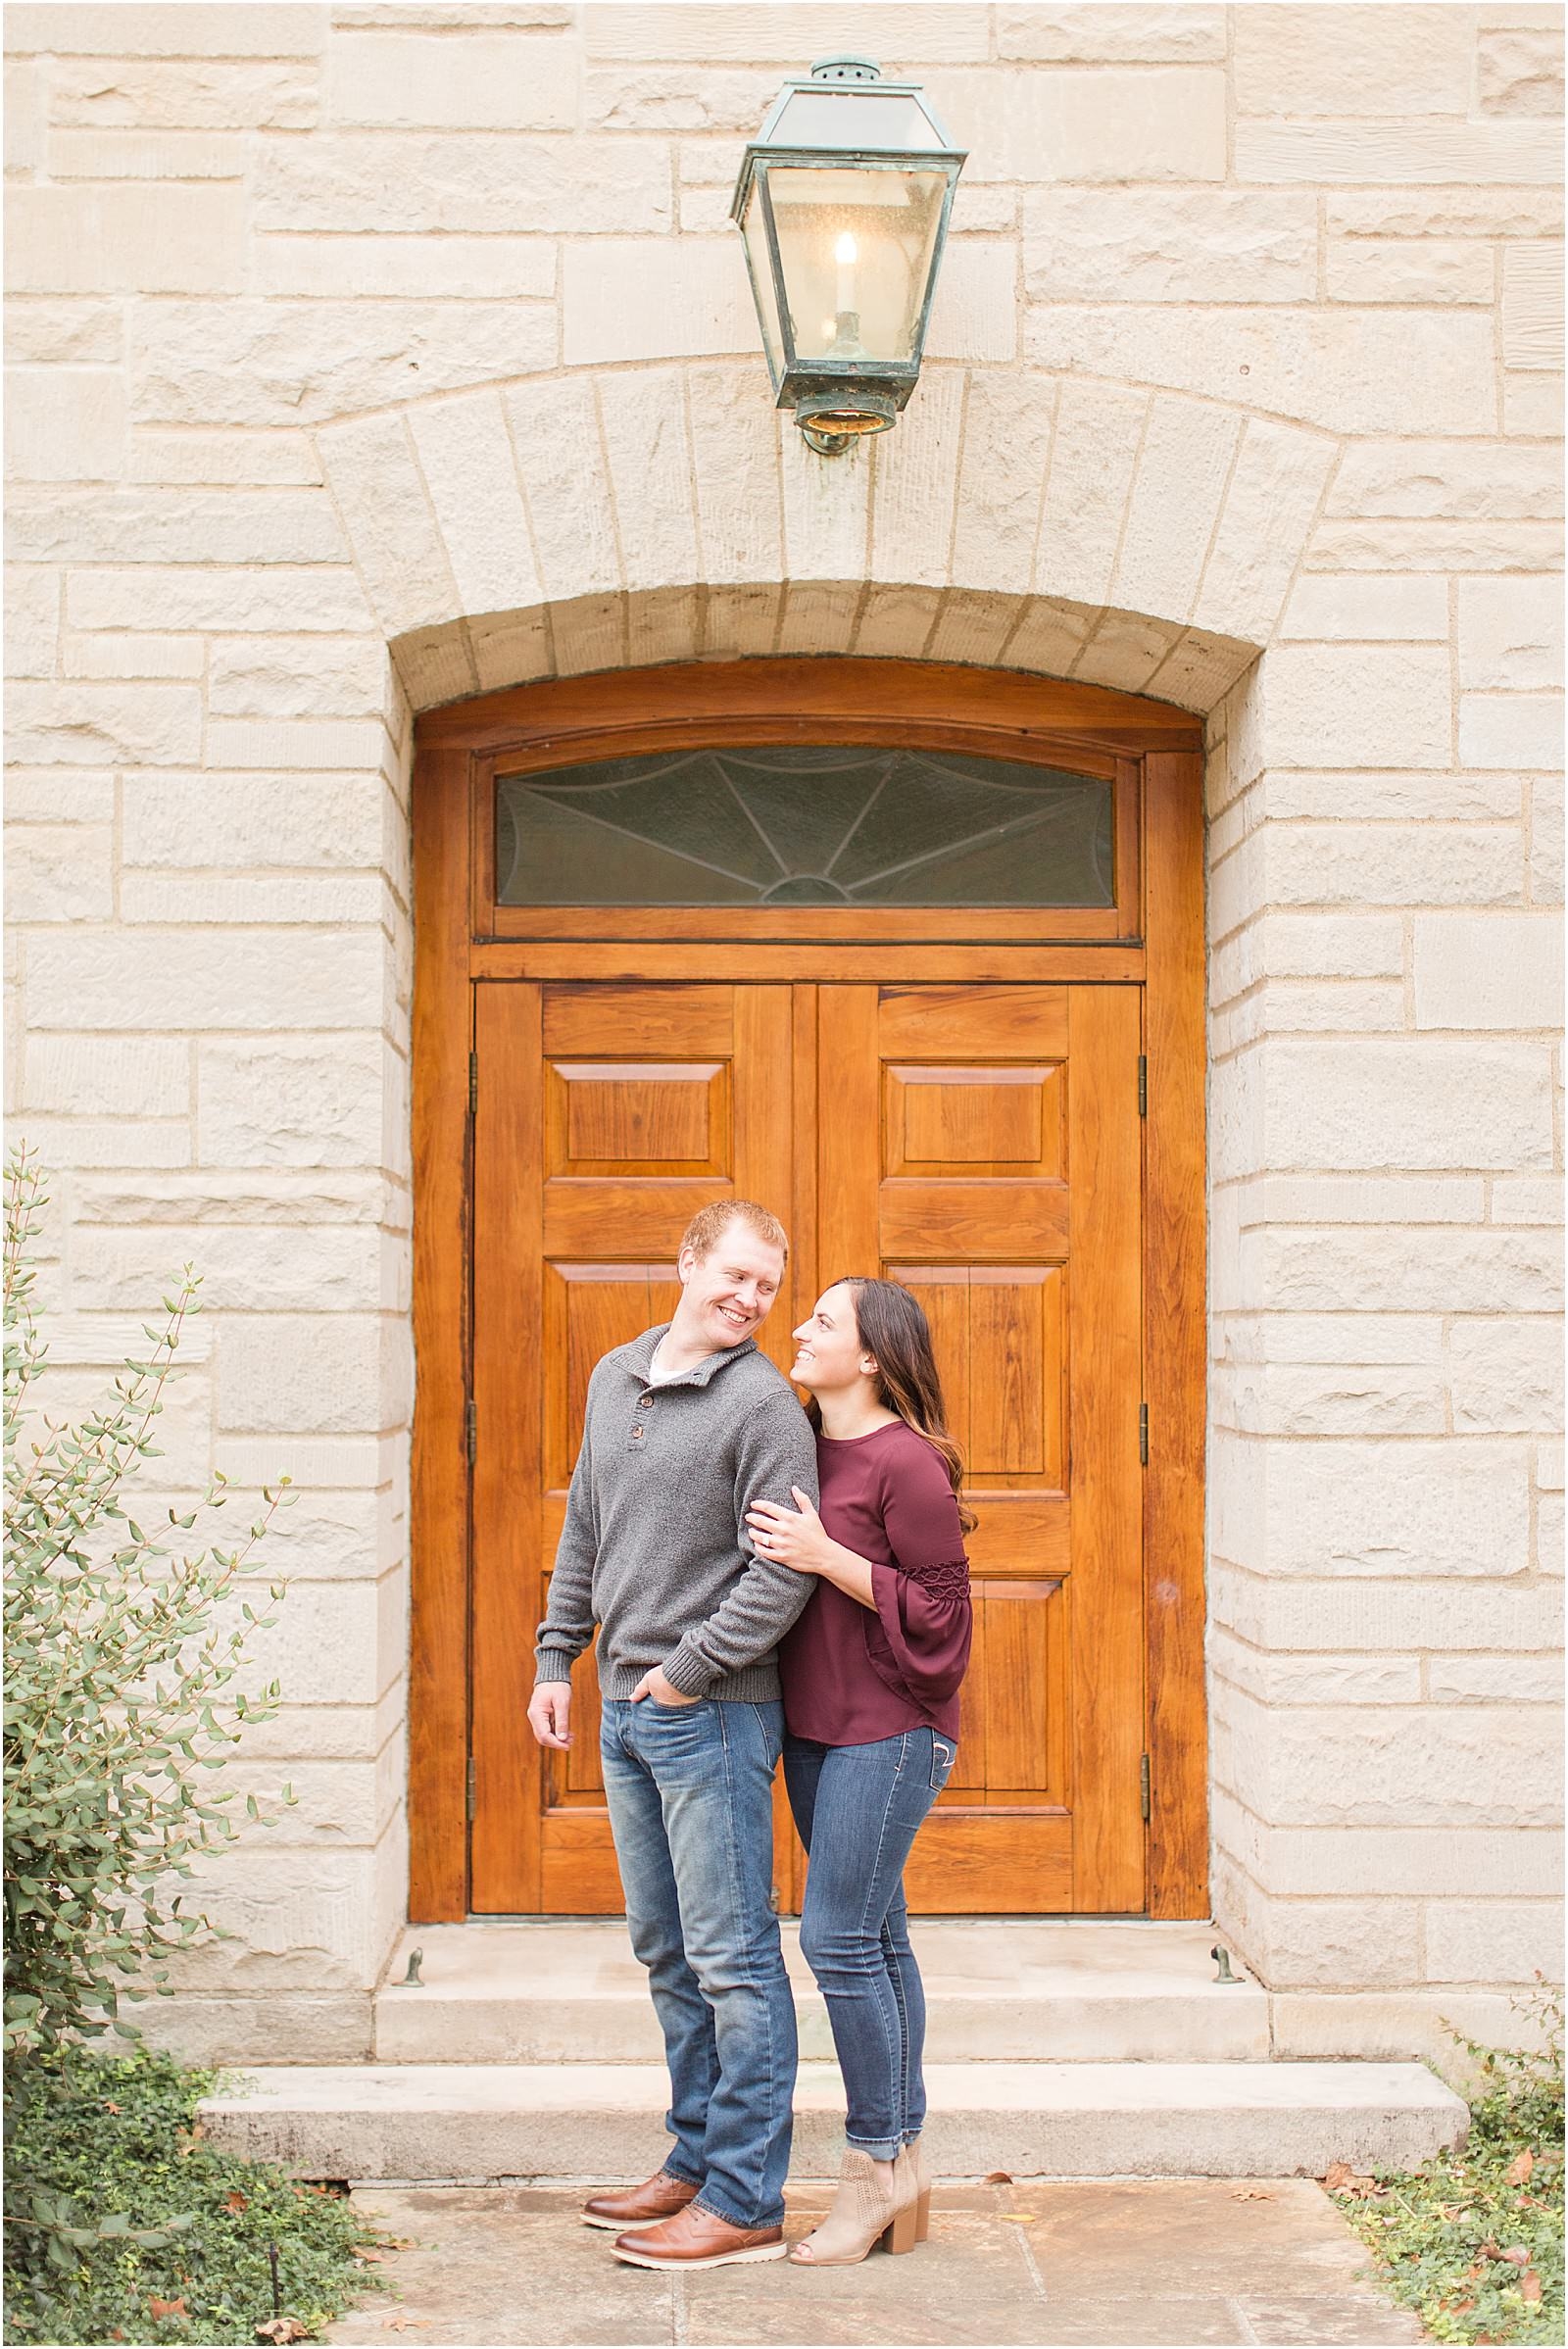 A Lincoln State Park Engagemtent Session | Deidra and Andrew | Bret and Brandie Photography 0011.jpg